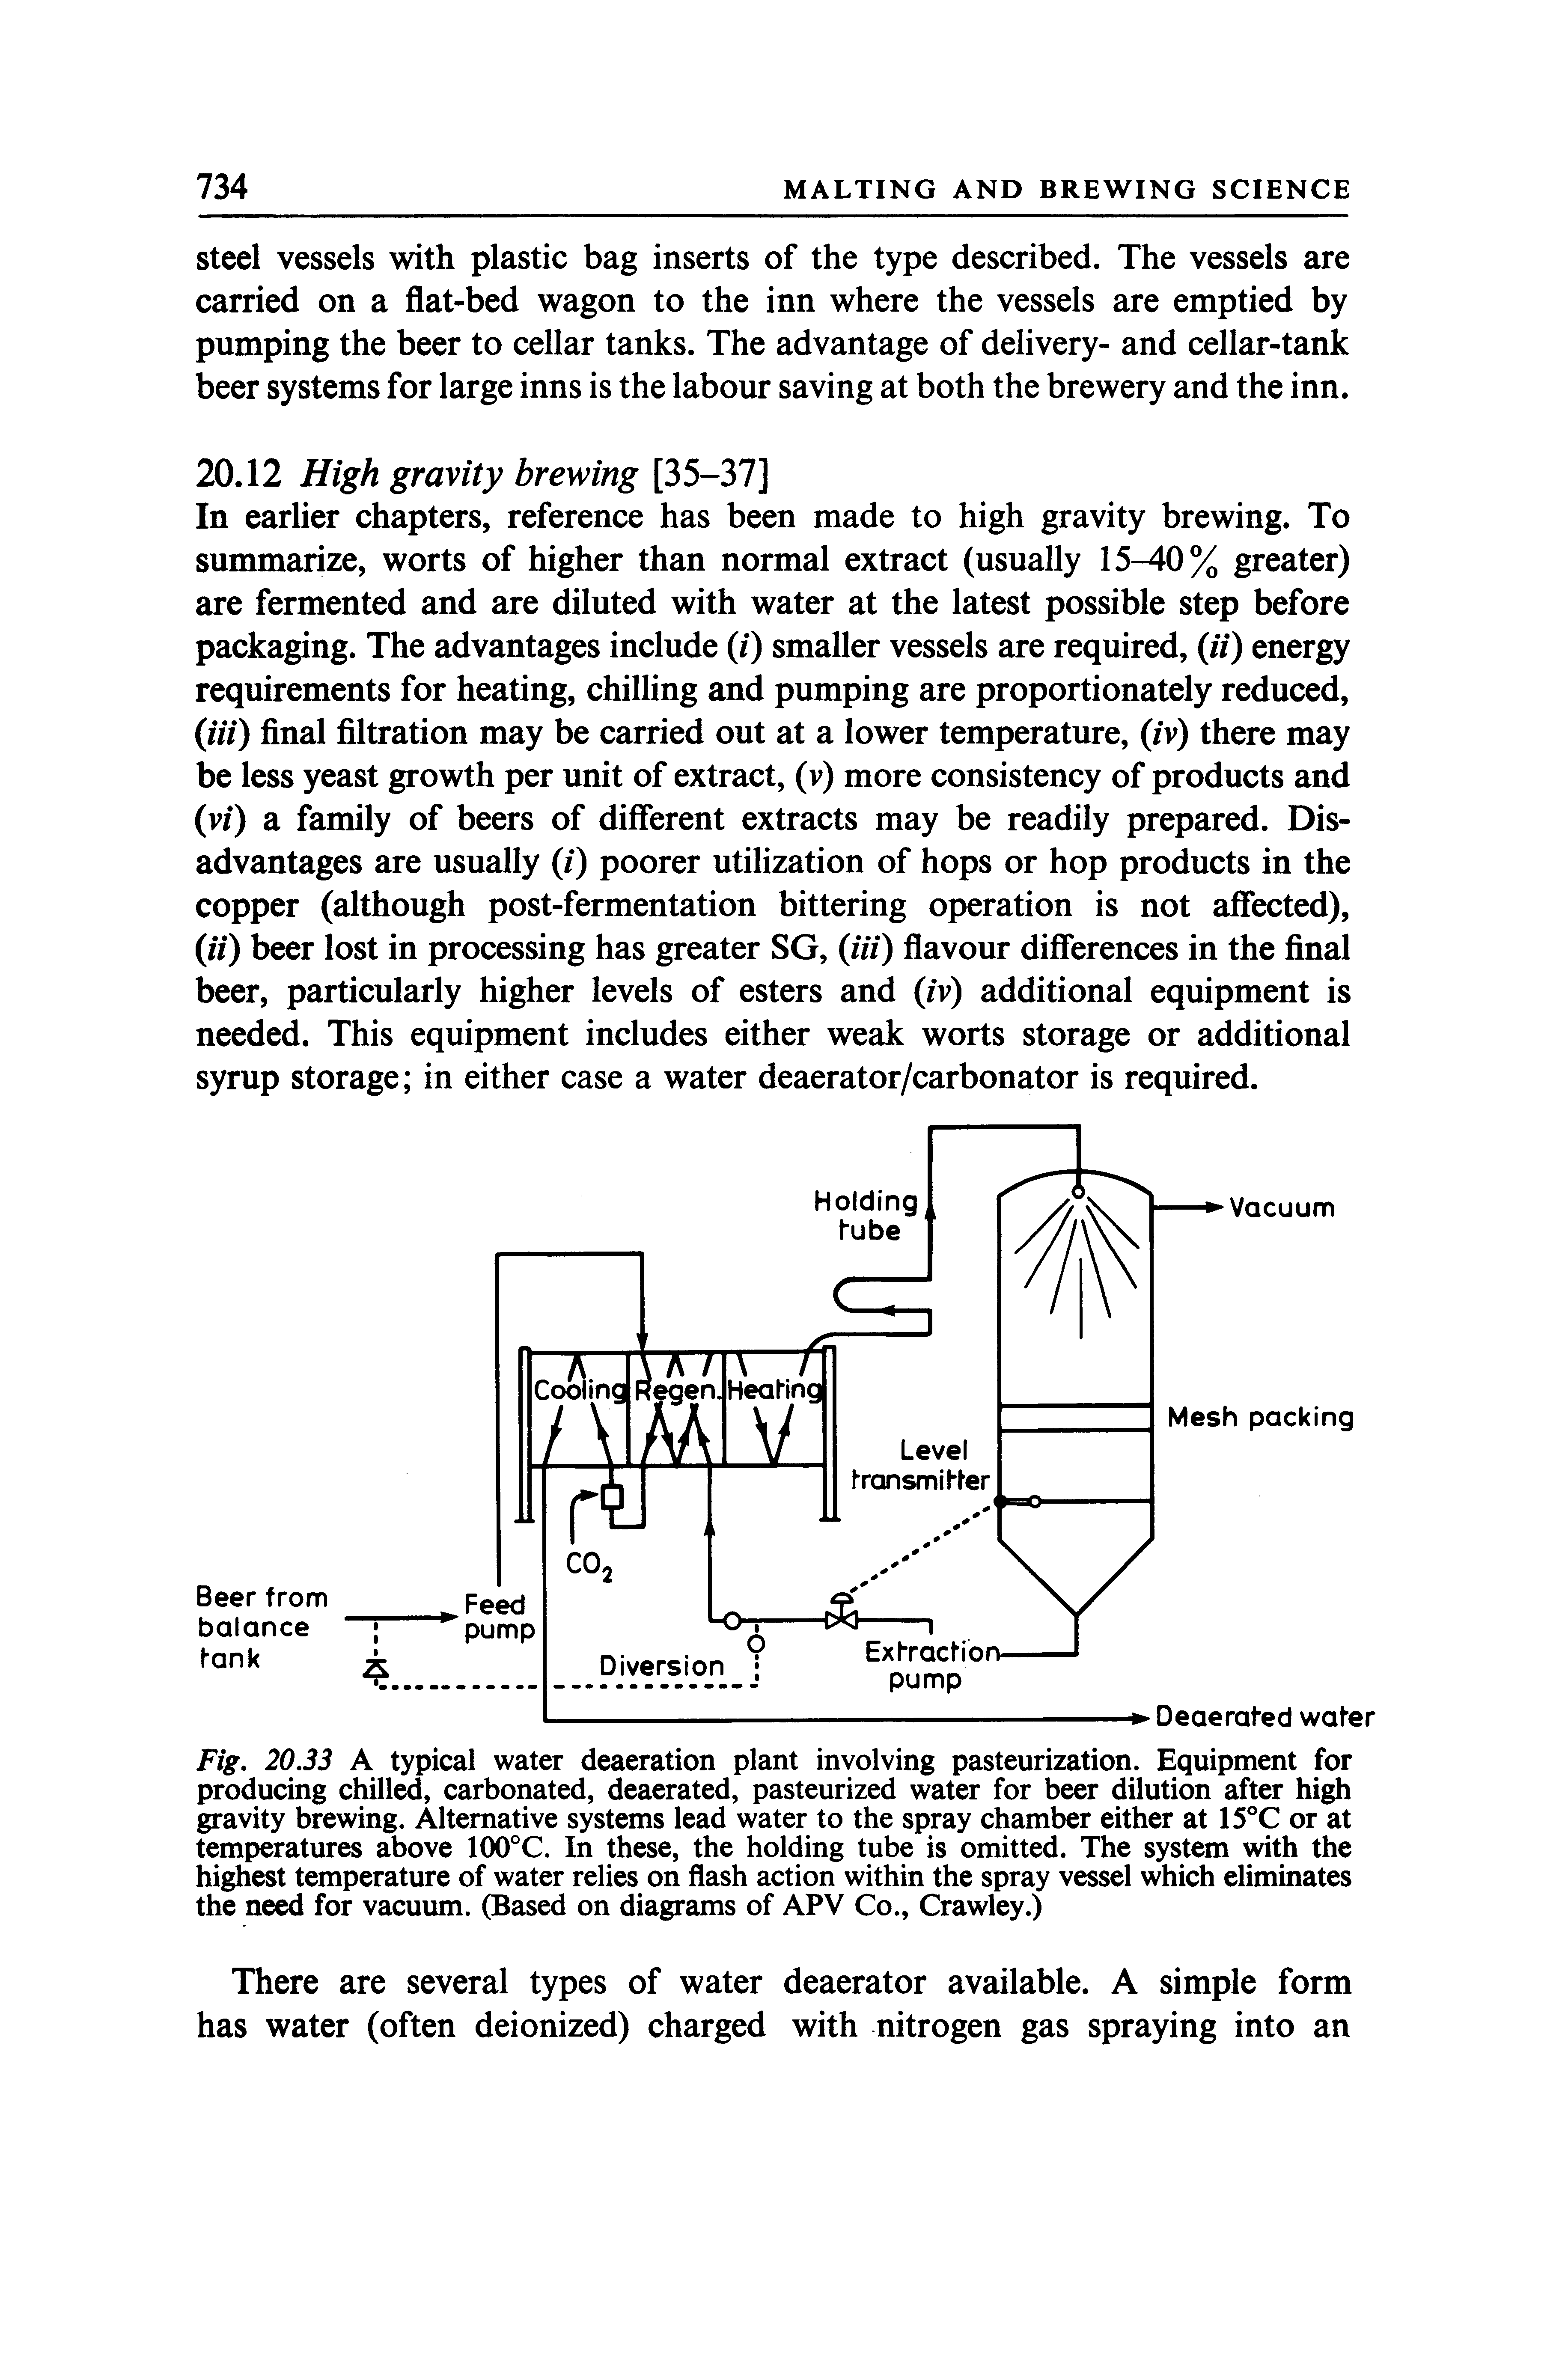 Fig. 20.33 A typical water deaeration plant involving pasteurization. Equipment for producing chilled, carbonated, deaerated, pasteurized water for beer dilution after high gravity brewing. Alternative systems lead water to the spray chamber either at 15°C or at temperatures above 100°C. In these, the holding tube is omitted. The system with the highest temperature of water relies on flash action within the spray vessel which eliminates the need for vacuum. (Based on diagrams of APV Co., Crawley.)...